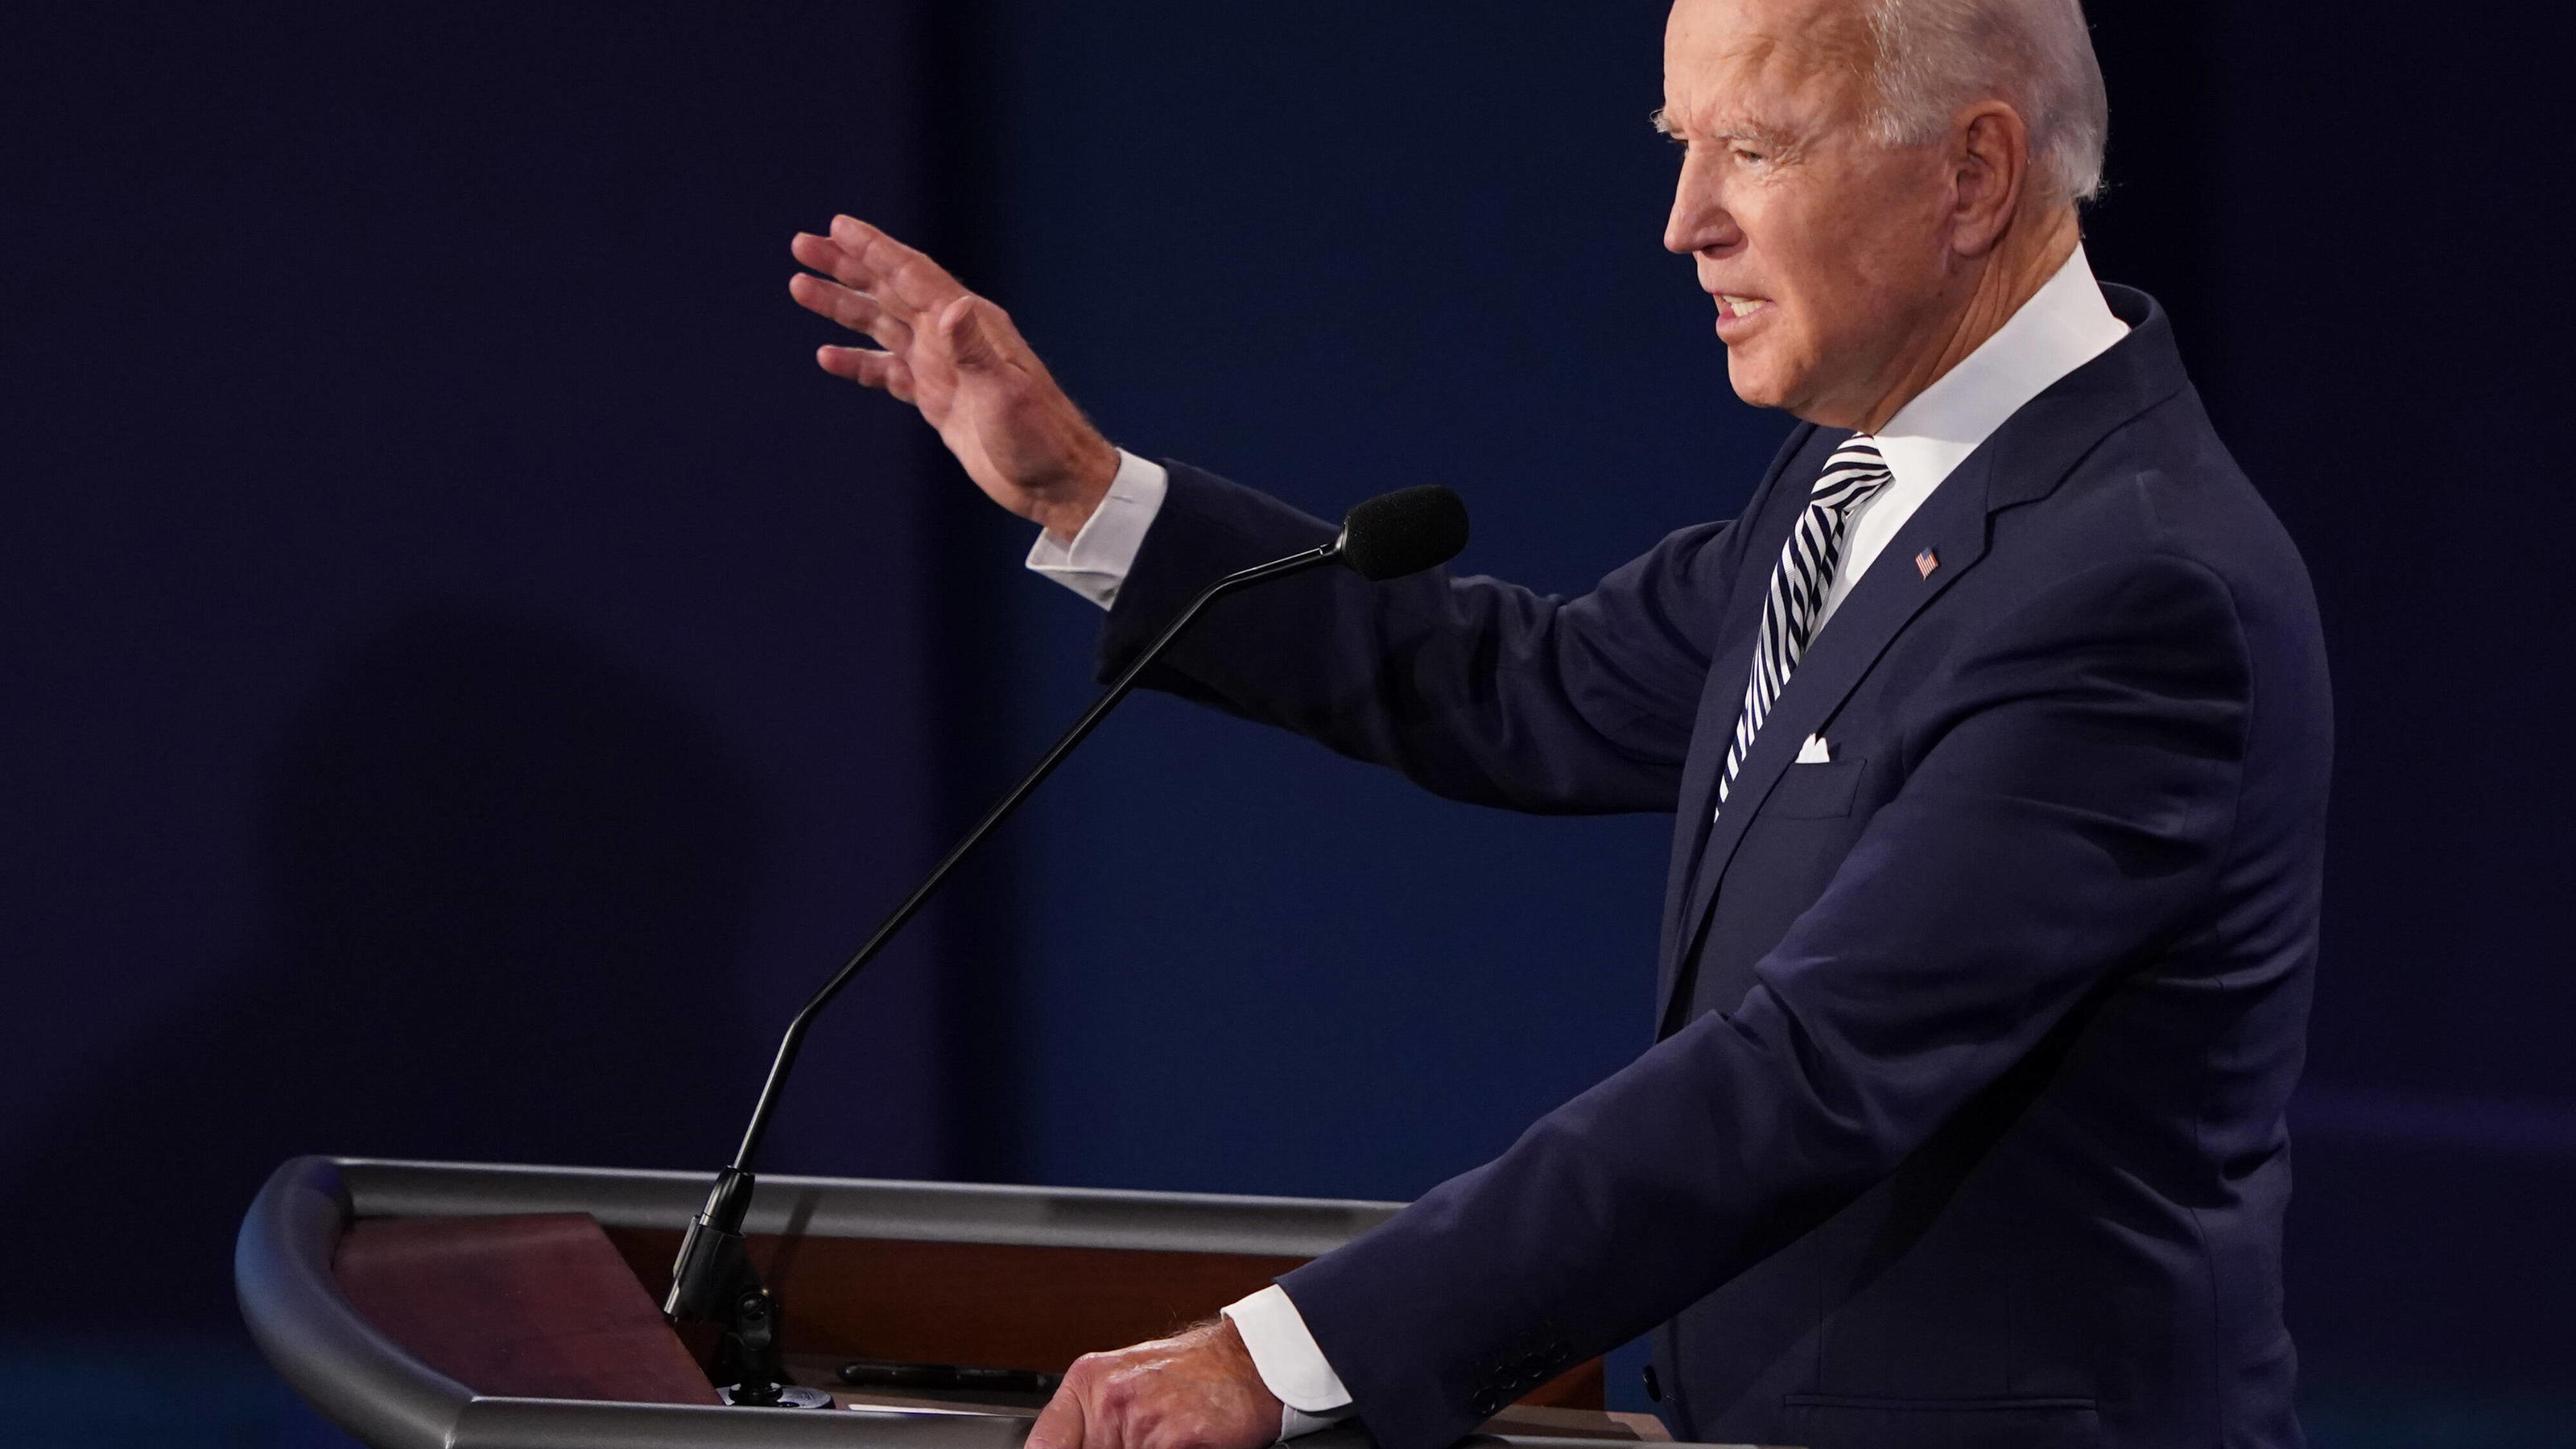  Democratic presidential nominee Joe Biden speaks during the first of three scheduled 90 minute presidential debates with President Donald Trump, Cleveland, Ohio, on Tuesday, September 29, 2020. PUBLICATIONxNOTxINxUSA Copyright: xKevinxDietschx/xPool